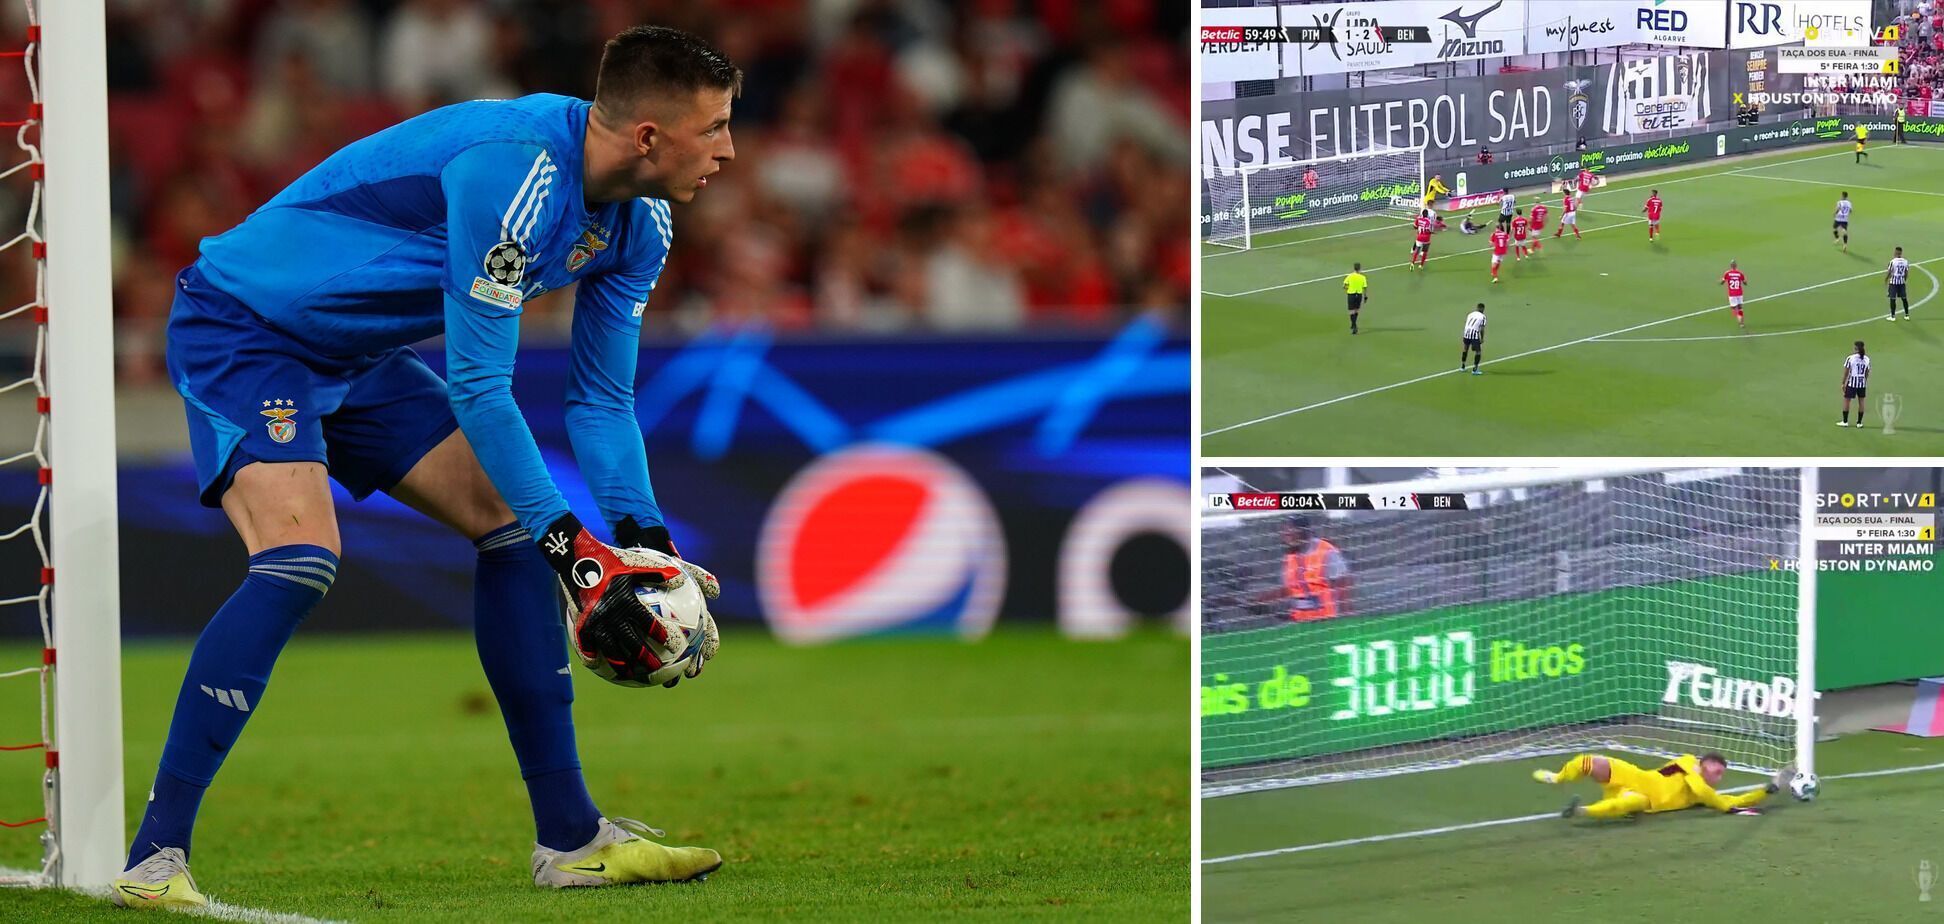 Ukrainian goalkeeper Trubin conceded 3 goals in 21 minutes in the Champions League for Benfica. Video